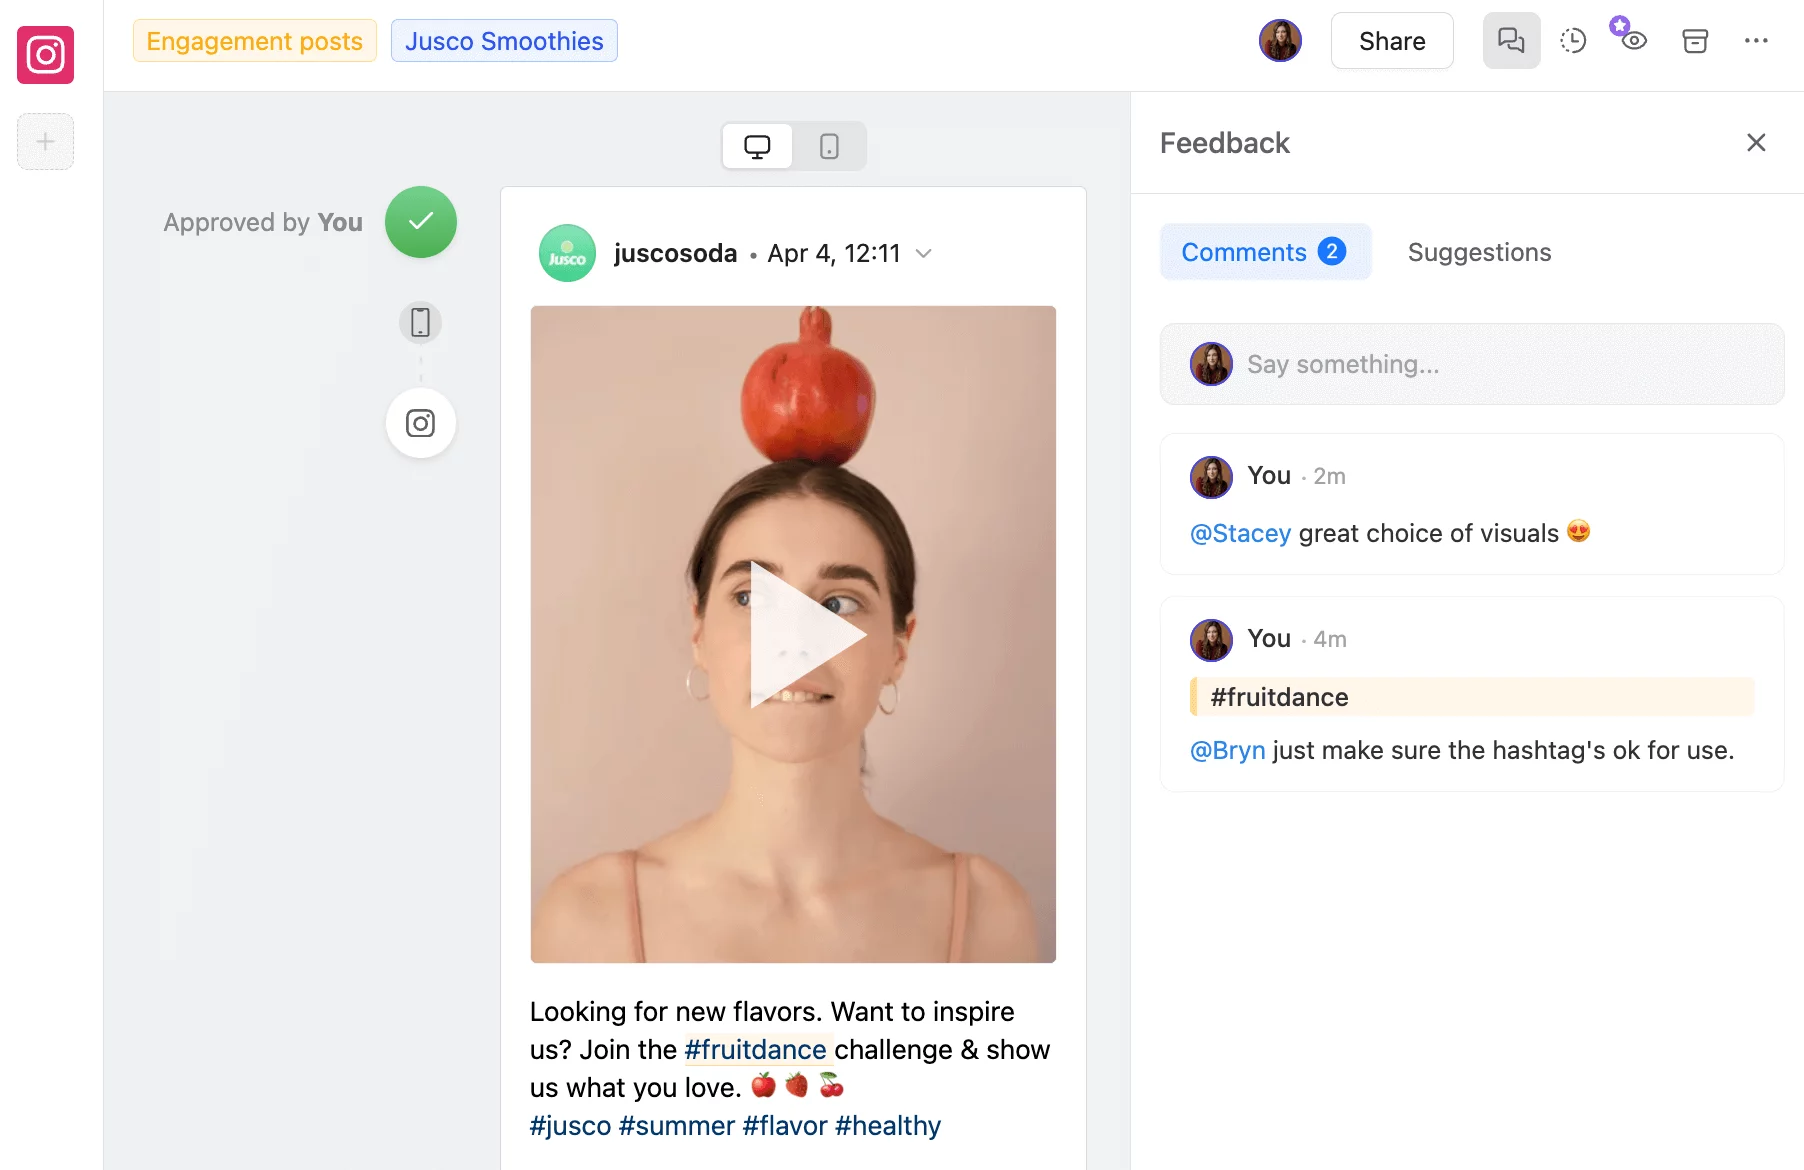 Content collaboration interface in Planable showing a Jusco Smoothies engagement post with a woman balancing a pomegranate on her head, alongside feedback comments.